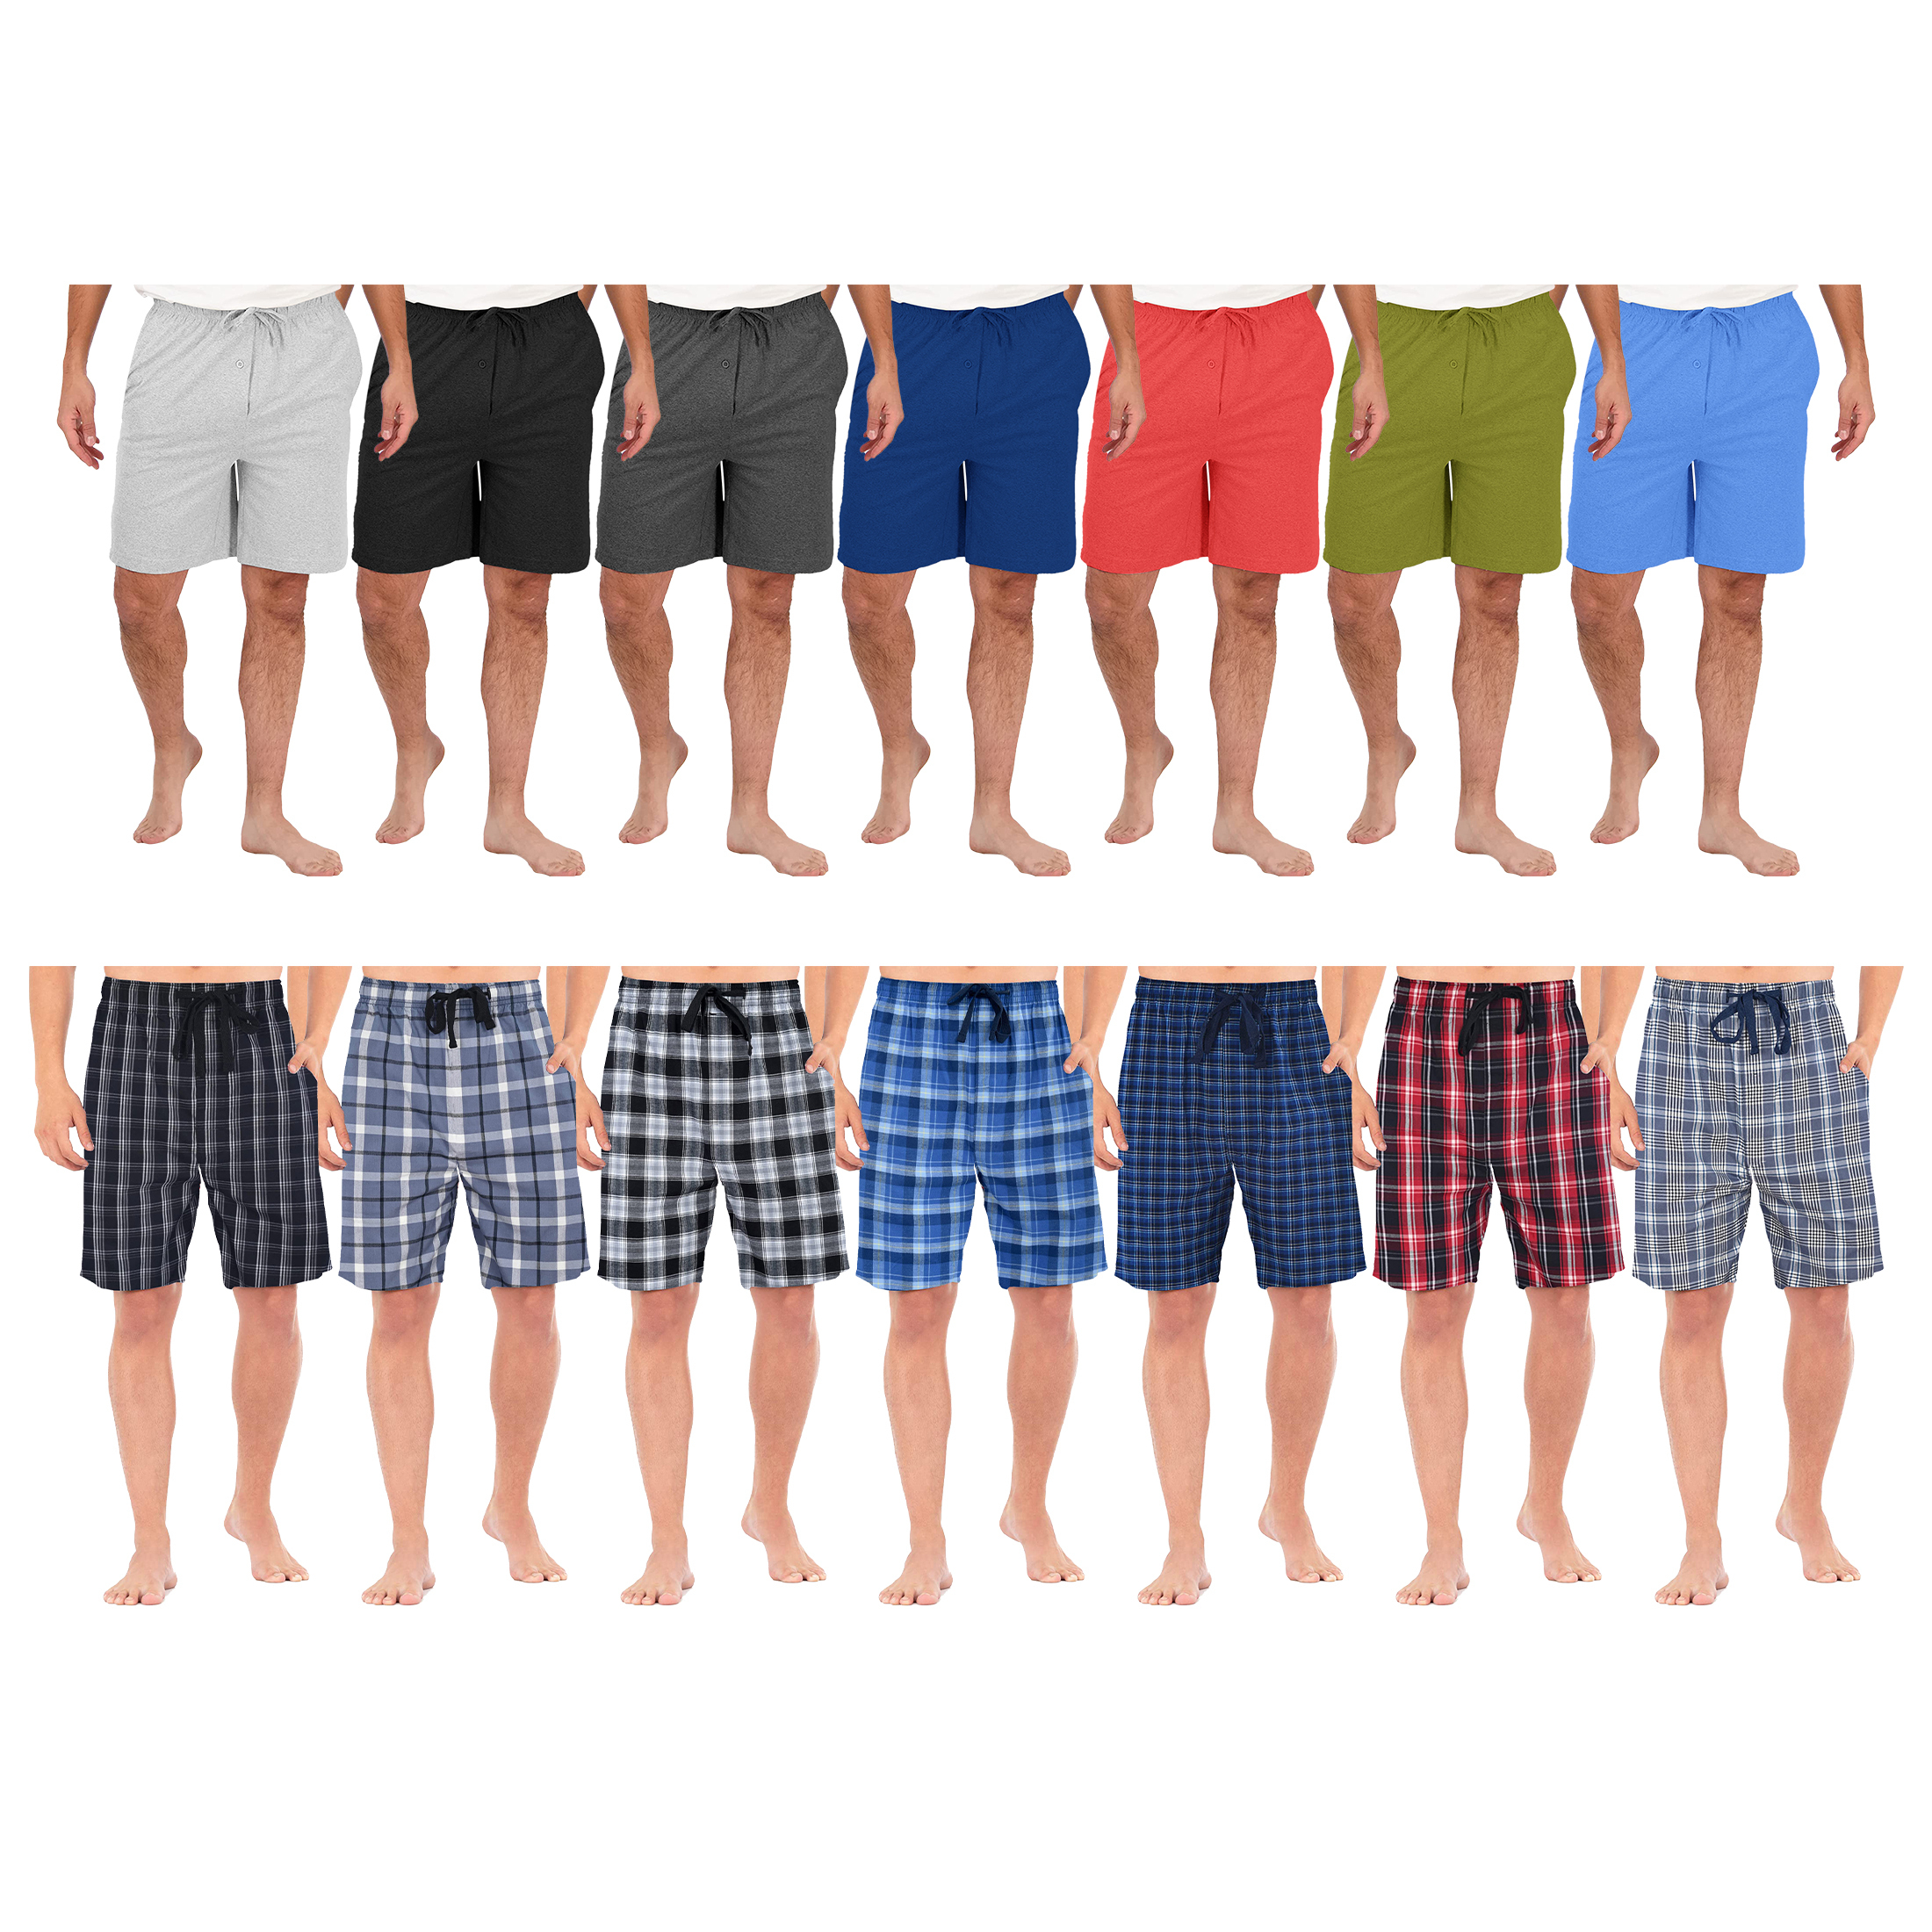 Multi-Pack: Men's Ultra-Soft Jersey Knit Sleep Lounge Pajama Shorts For Sleepwear - Solid, 1 Pack, Large